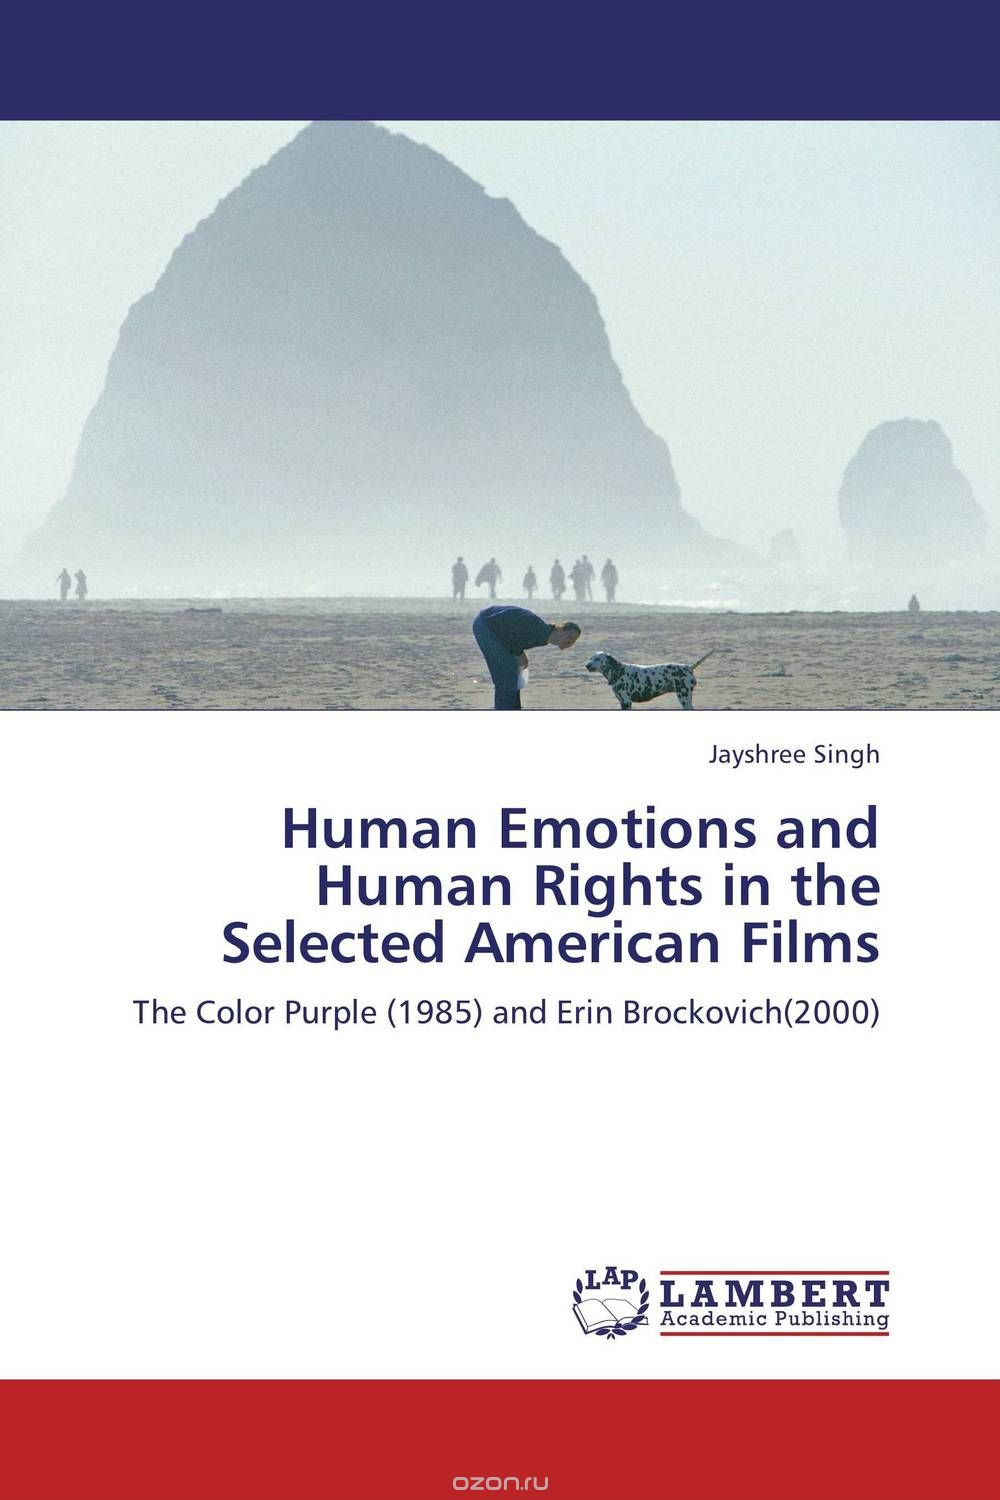 Скачать книгу "Human Emotions and Human Rights in the Selected American Films"